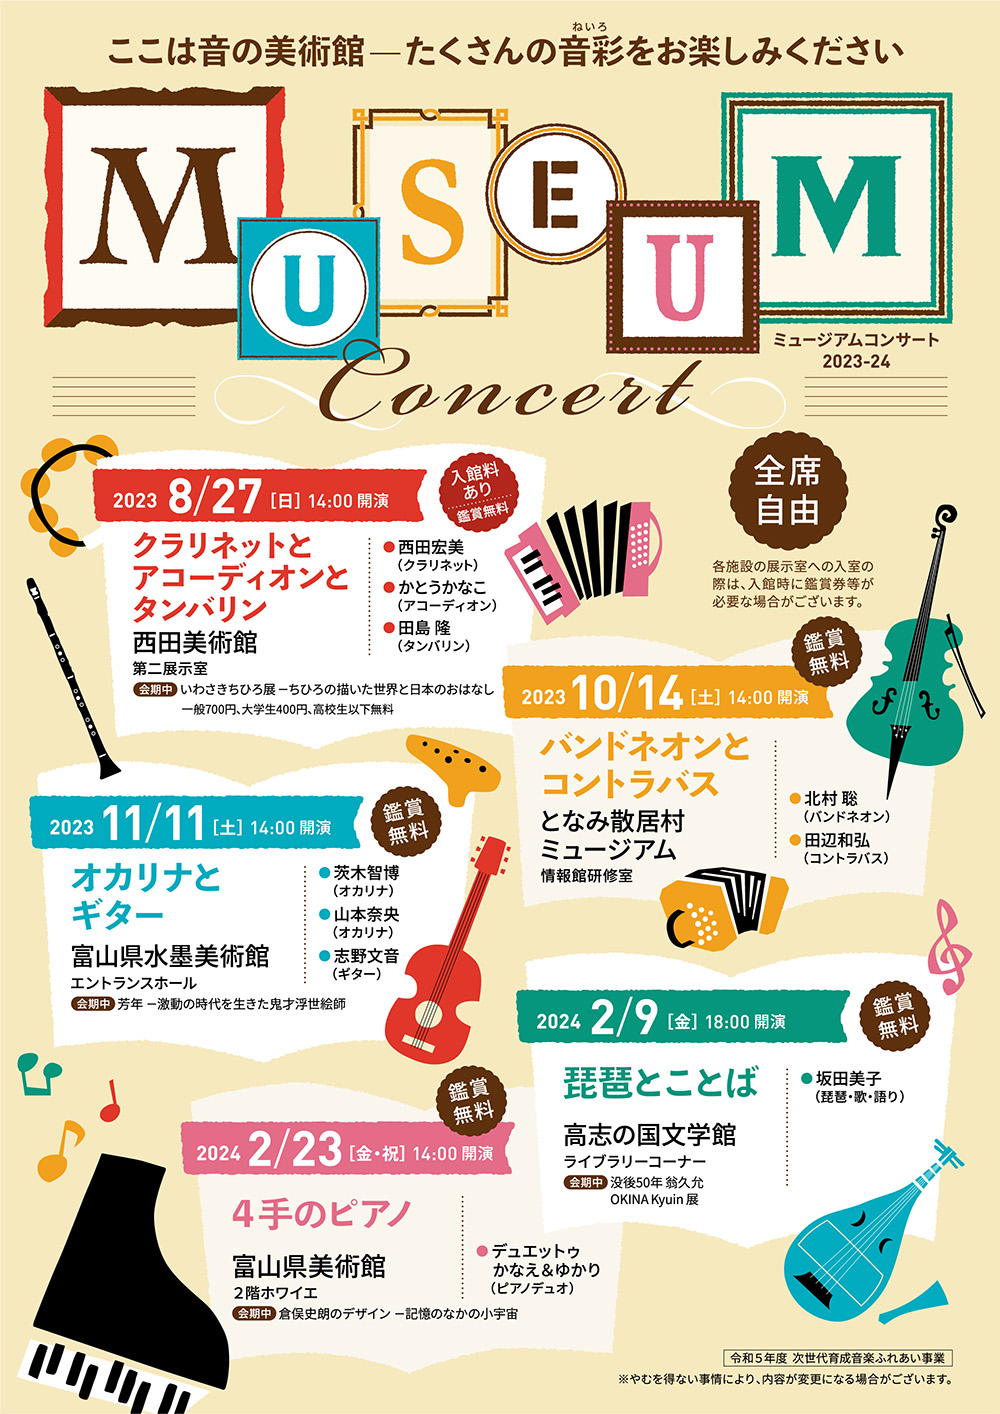 MUSEUM Concert 音楽といっしょに Side-by-Side